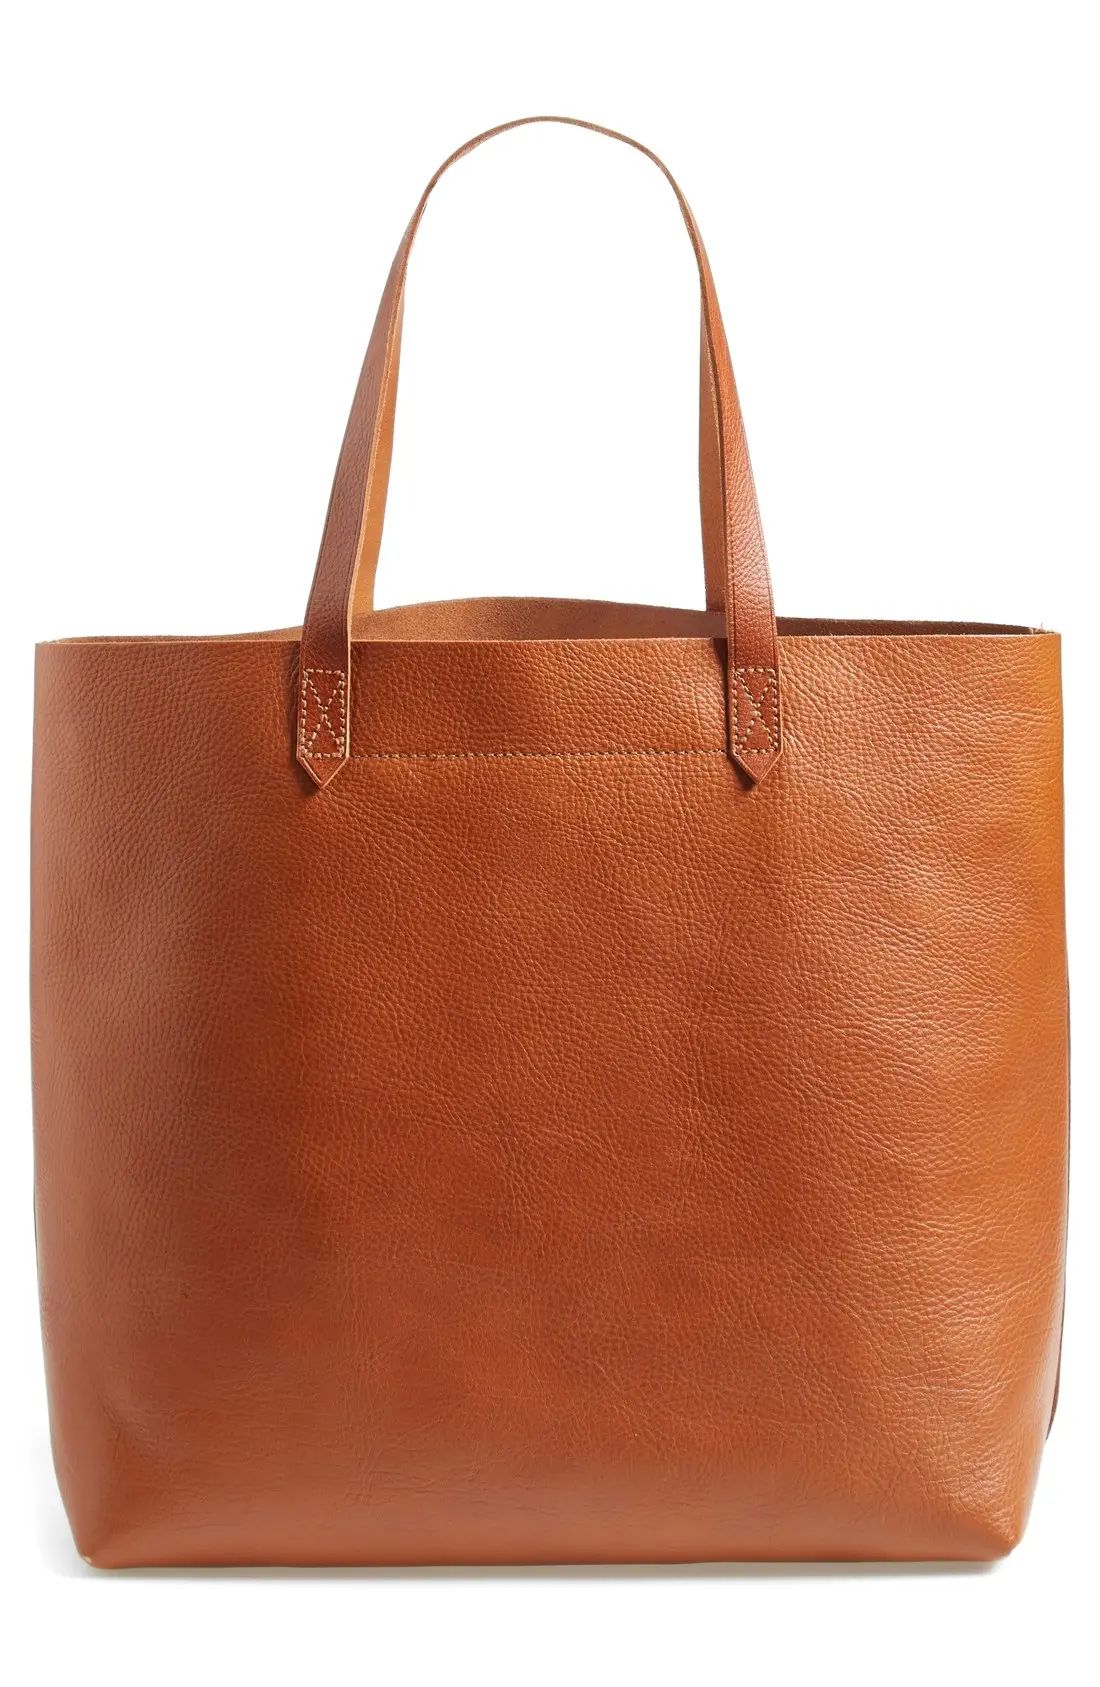 'The Transport' Leather Tote | Nordstrom